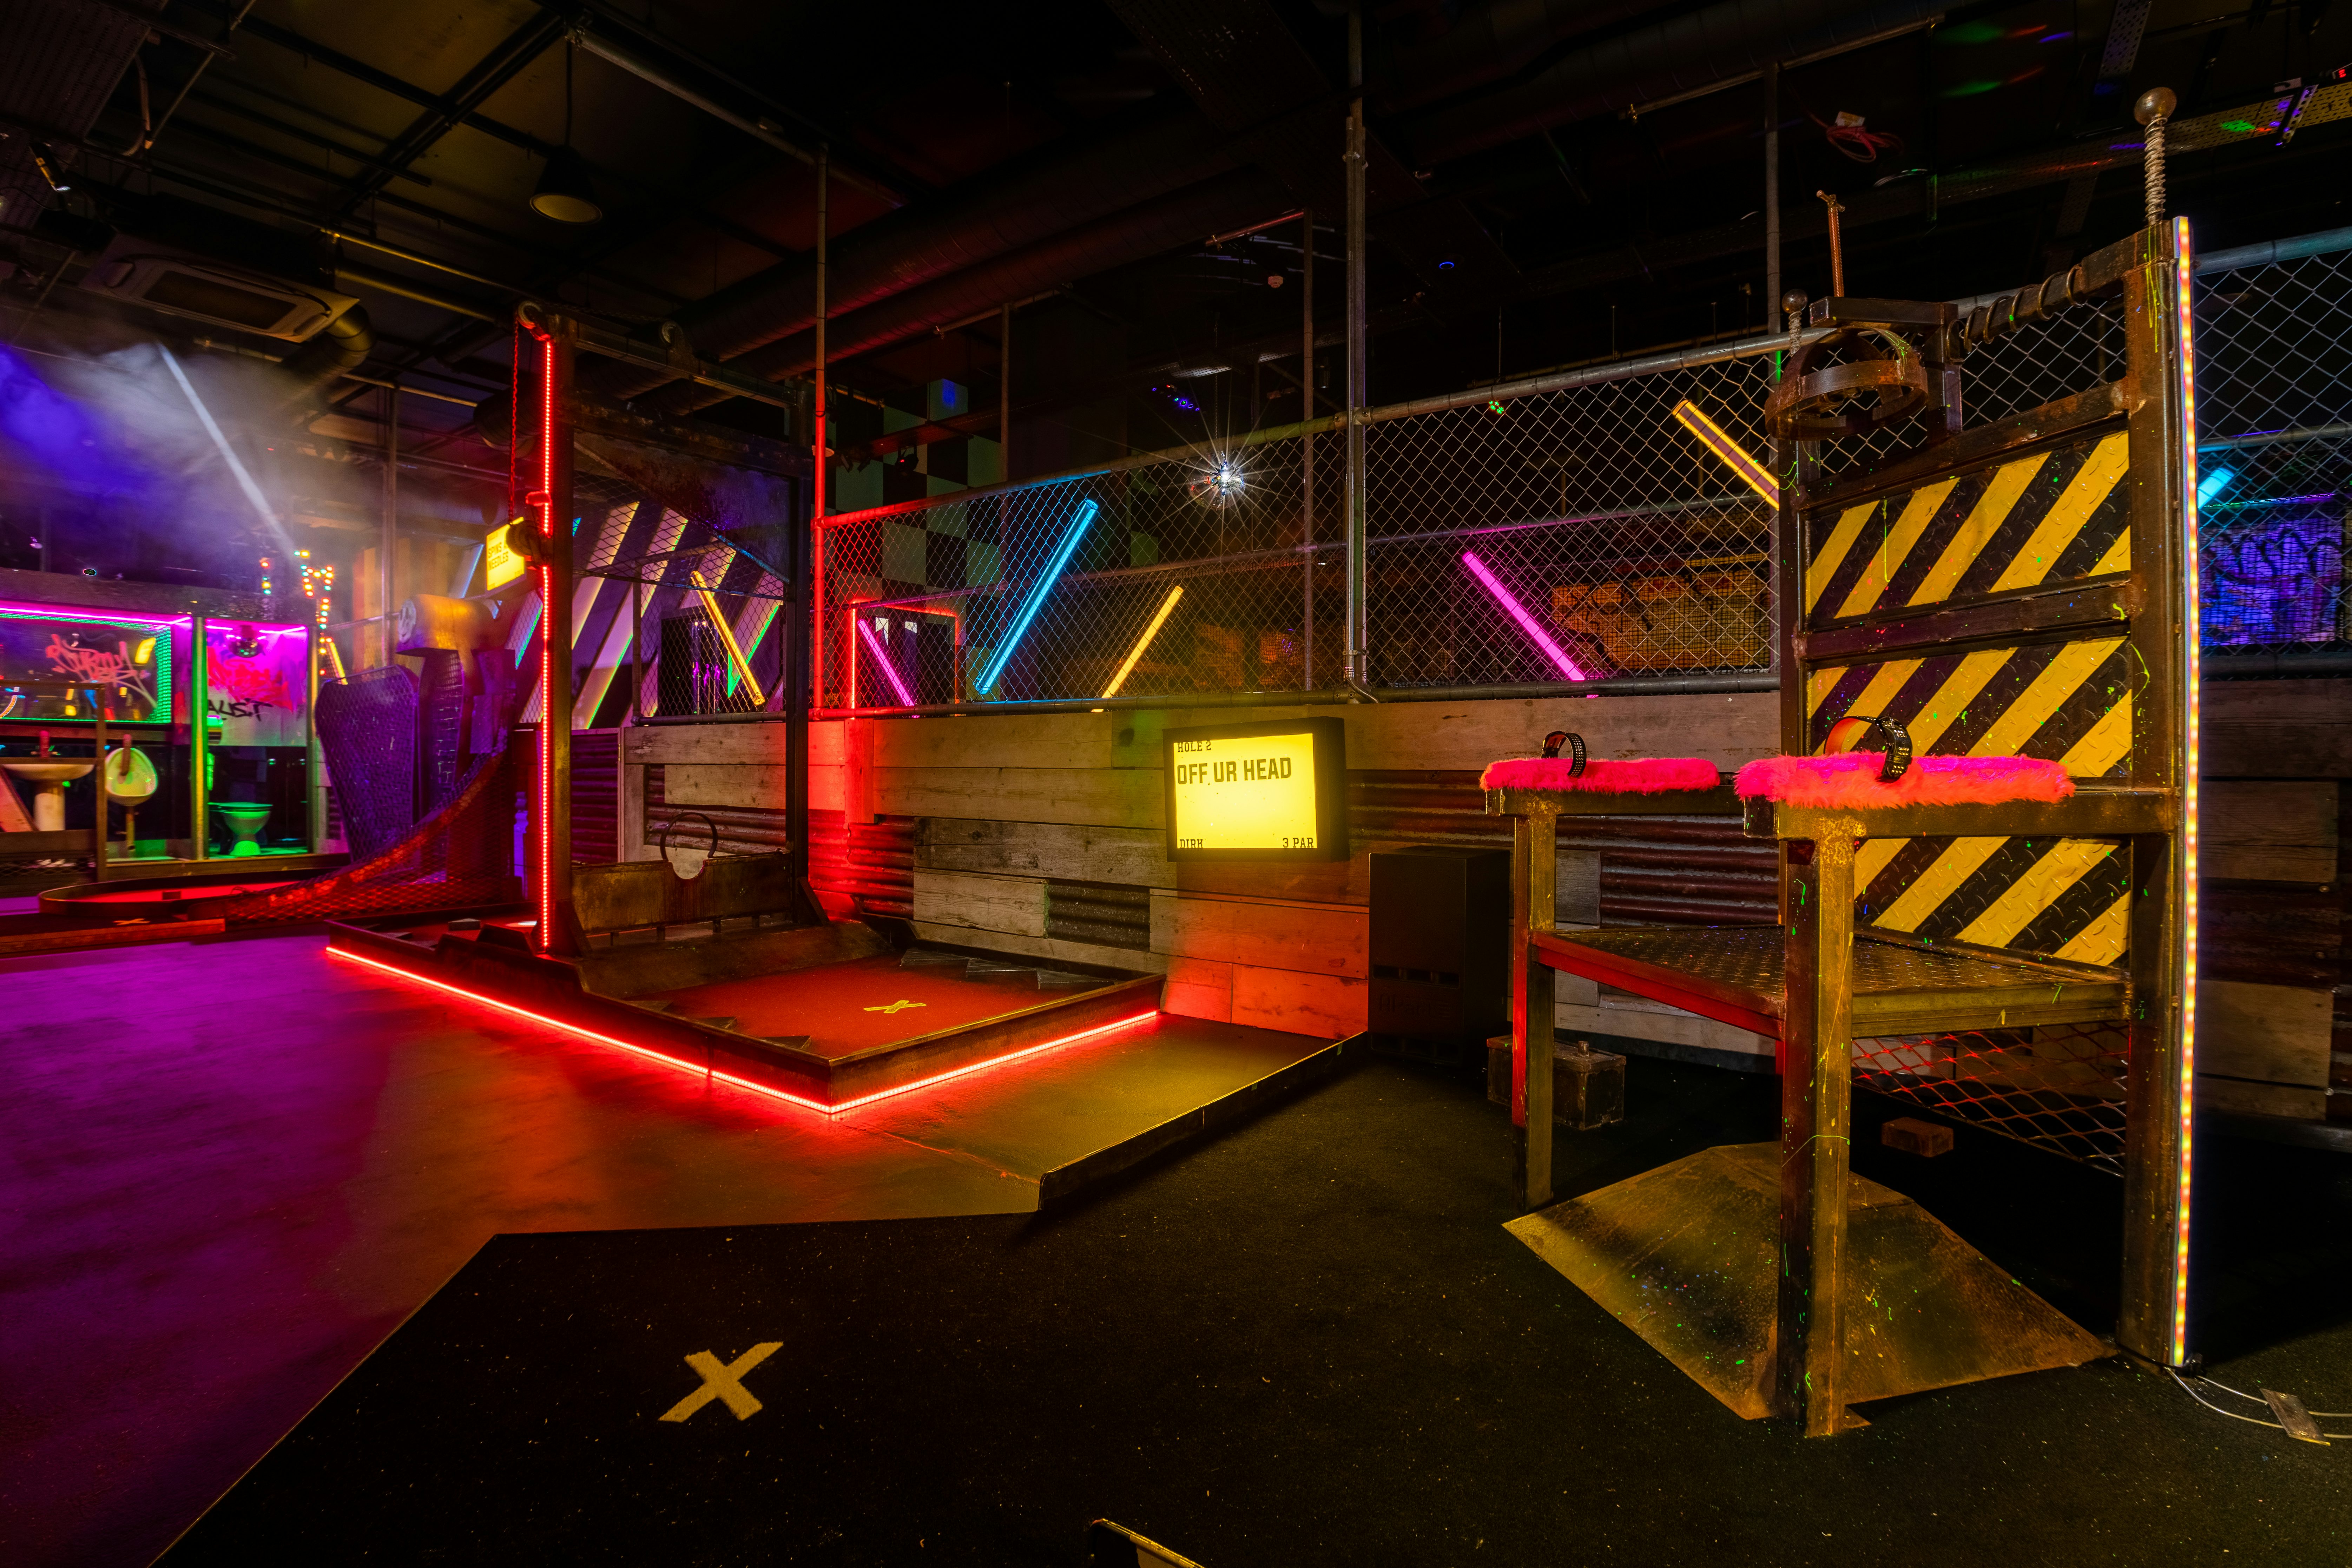 Junkyard Golf Club on X: Born Trippy? Rave through the 90s on course Dirk.  Exclusive to our London Junkyard, expect big tunes, furry walls and  distorted floors 🏌️‍♀️. Book now 🔗 in